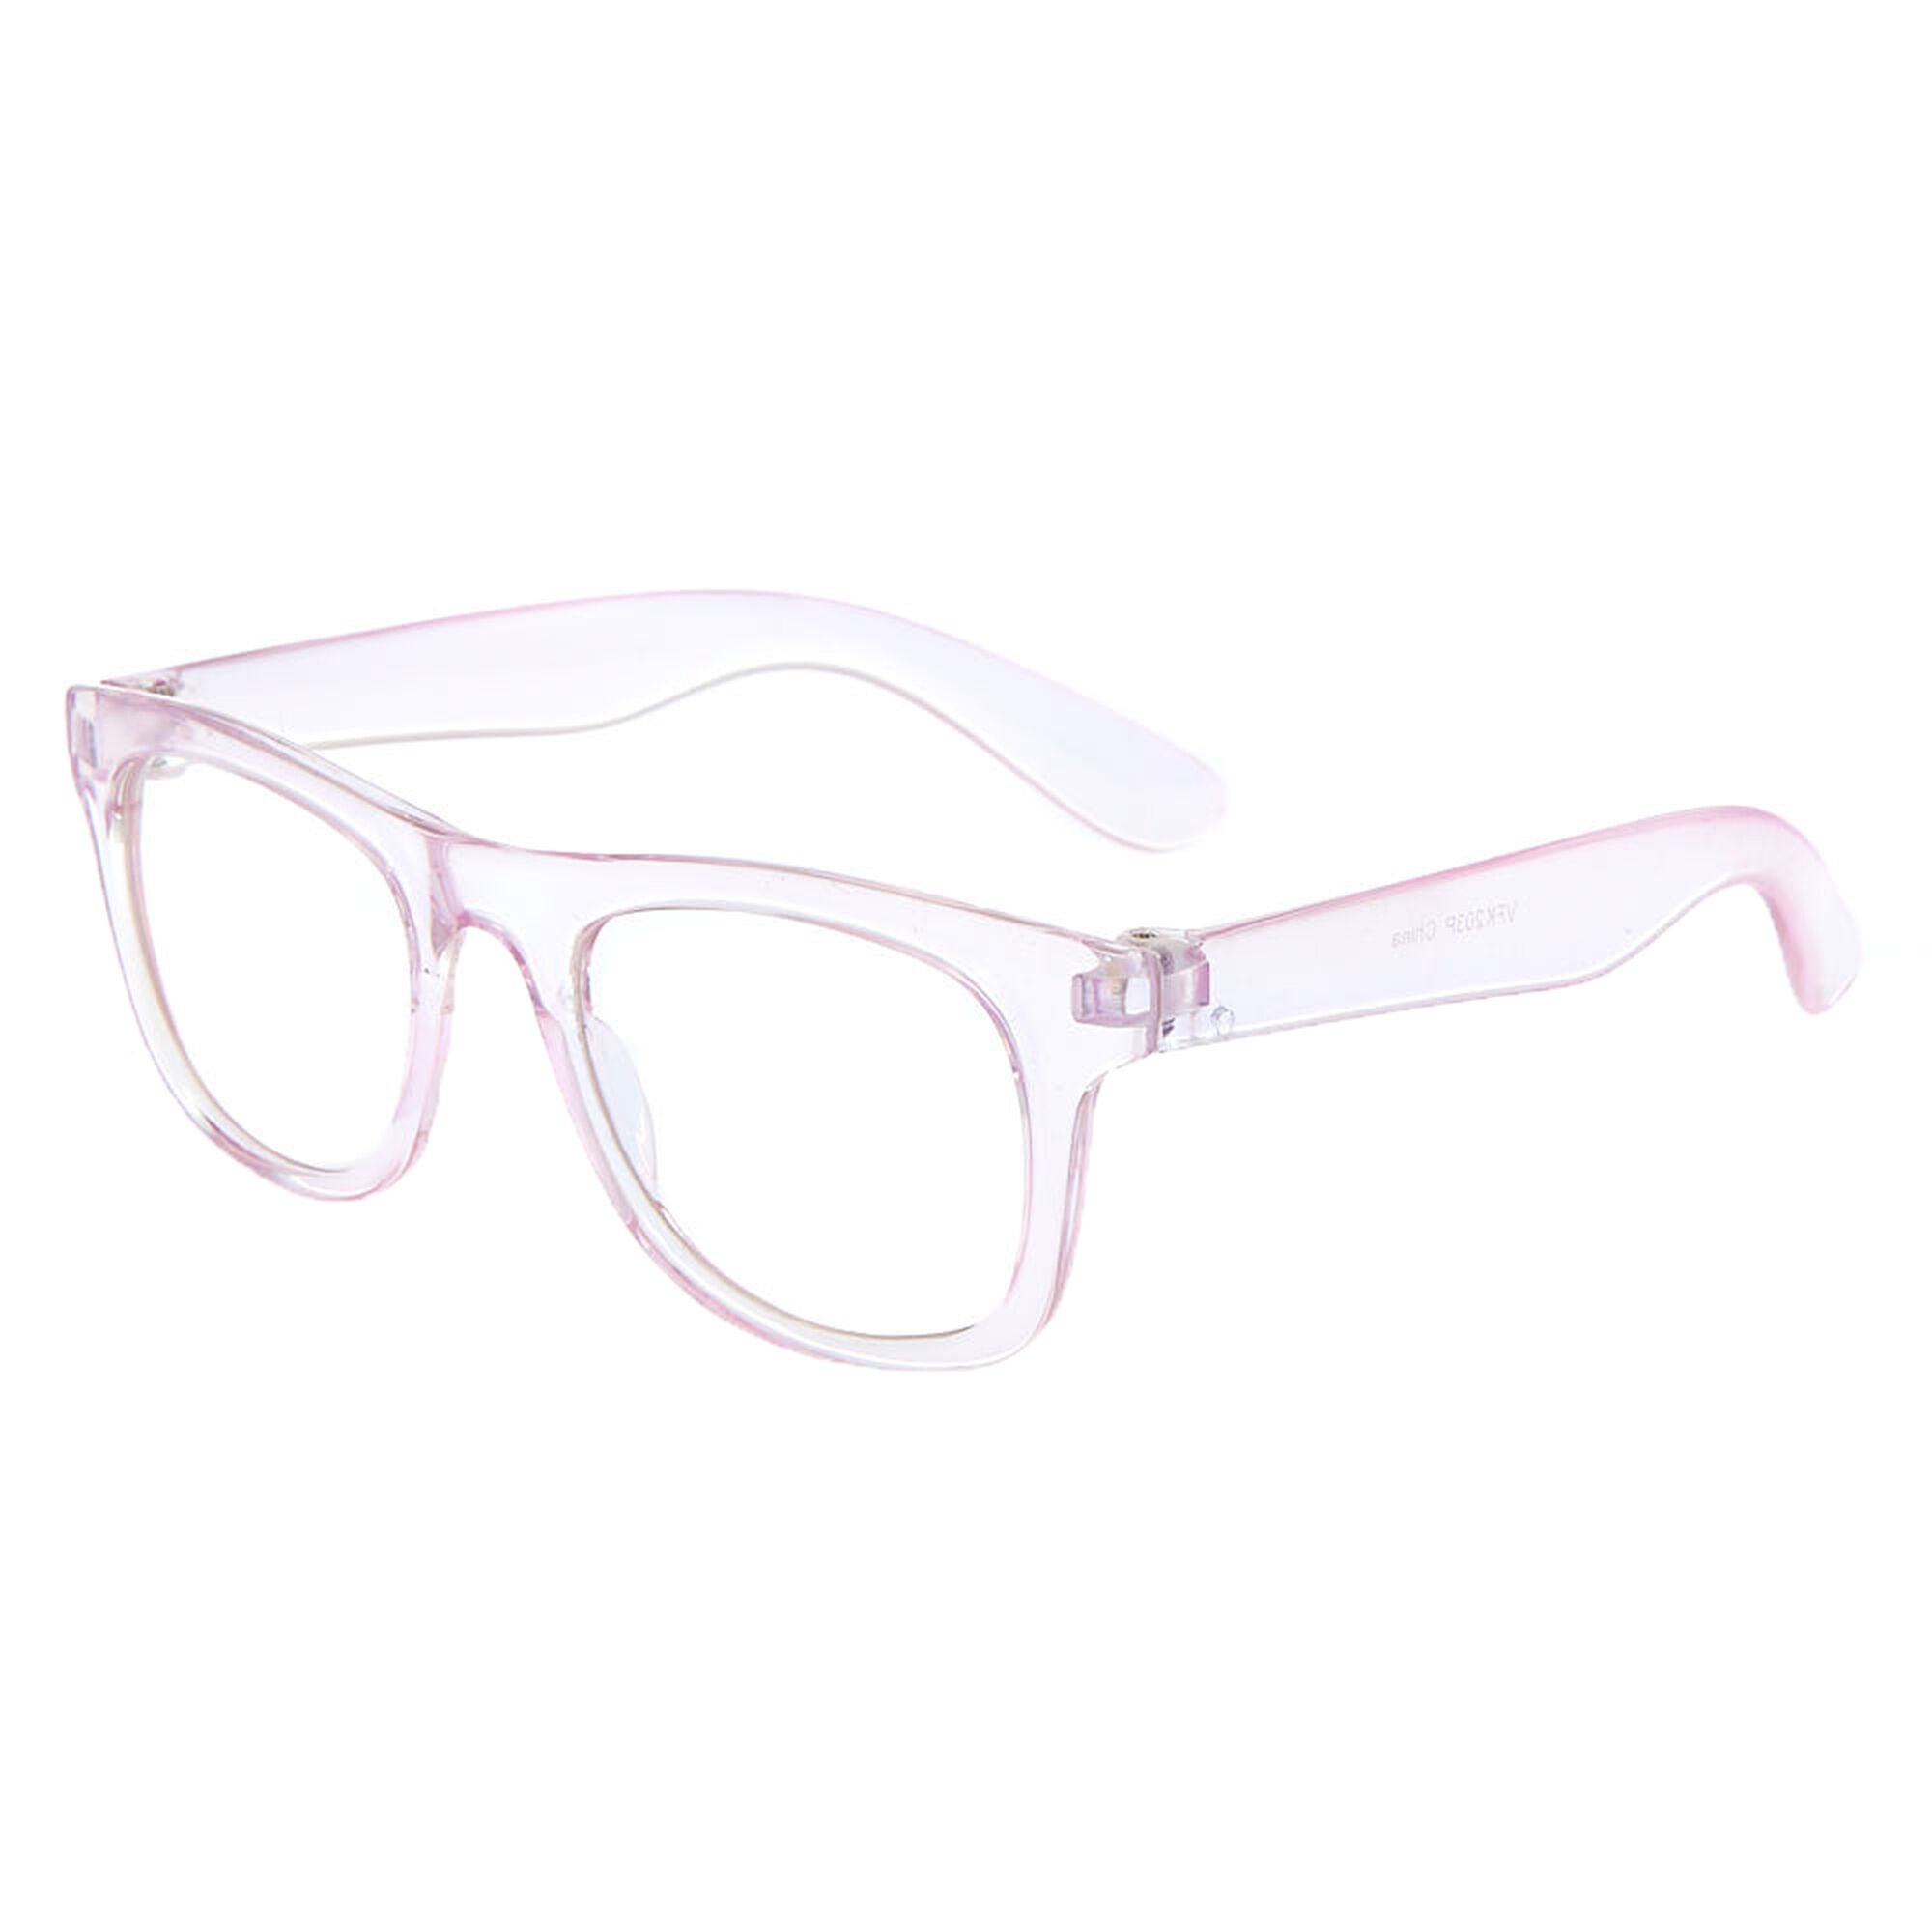 View Claires Club Iridescent Retro Clear Lens Frames information